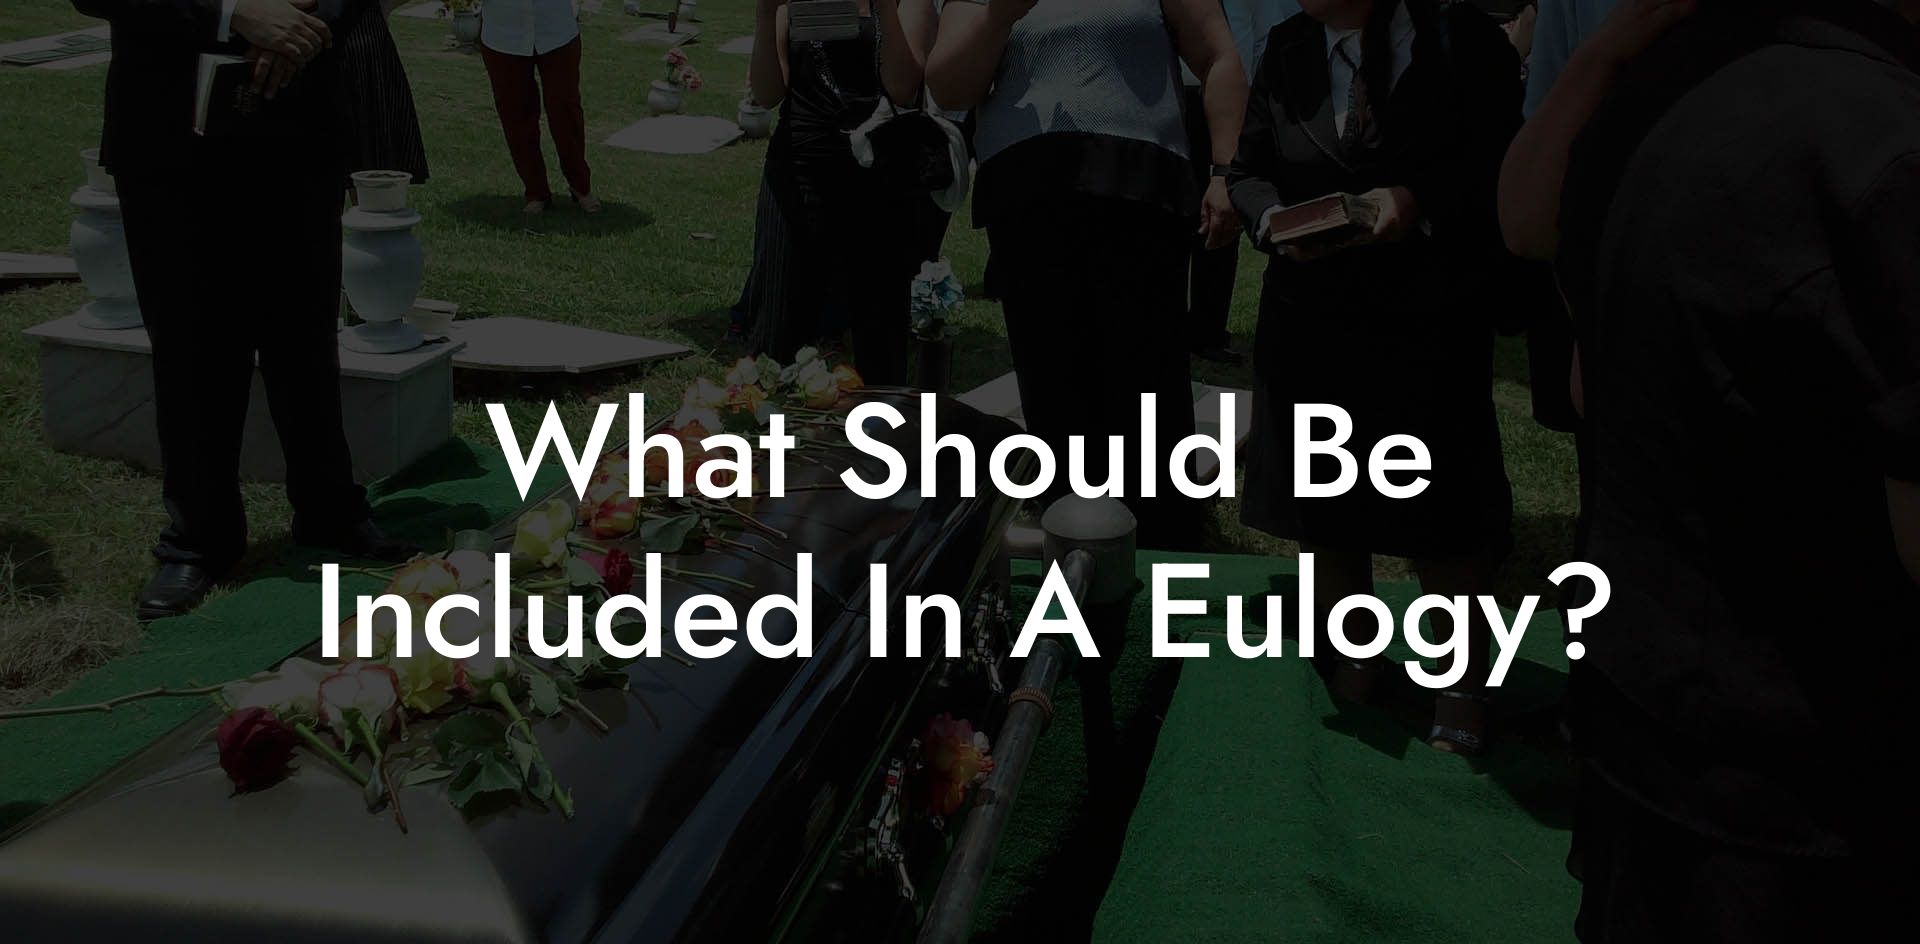 What Should Be Included In A Eulogy?